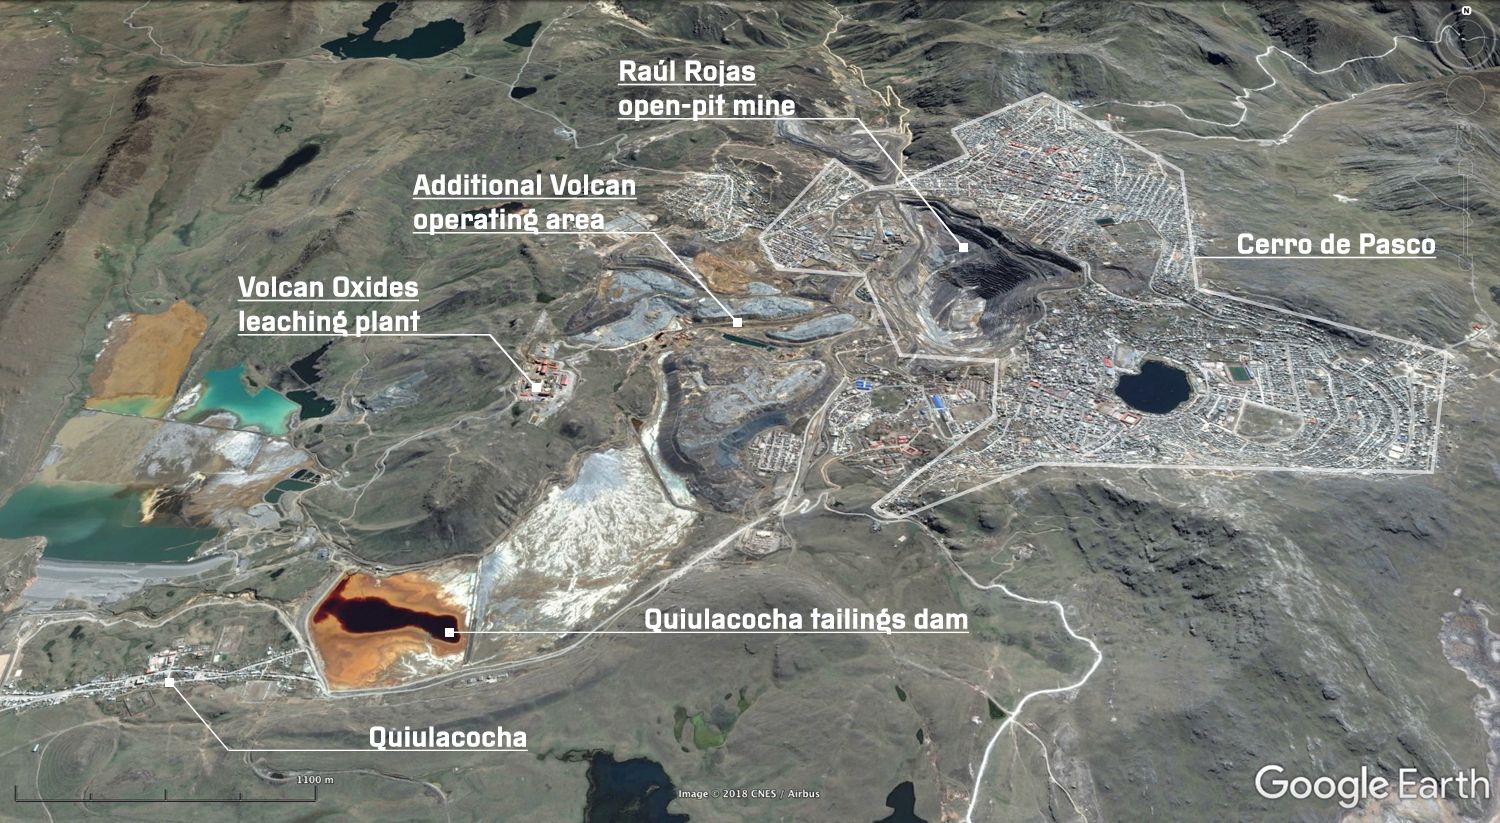 An aerial view of Cerro de Pasco, taken from Google Earth. The Quiulacocha tailings dam has been used for mining waste since the 1920s, before which it was known as the Lagoon of the Gulls. Image by Google, 2017.